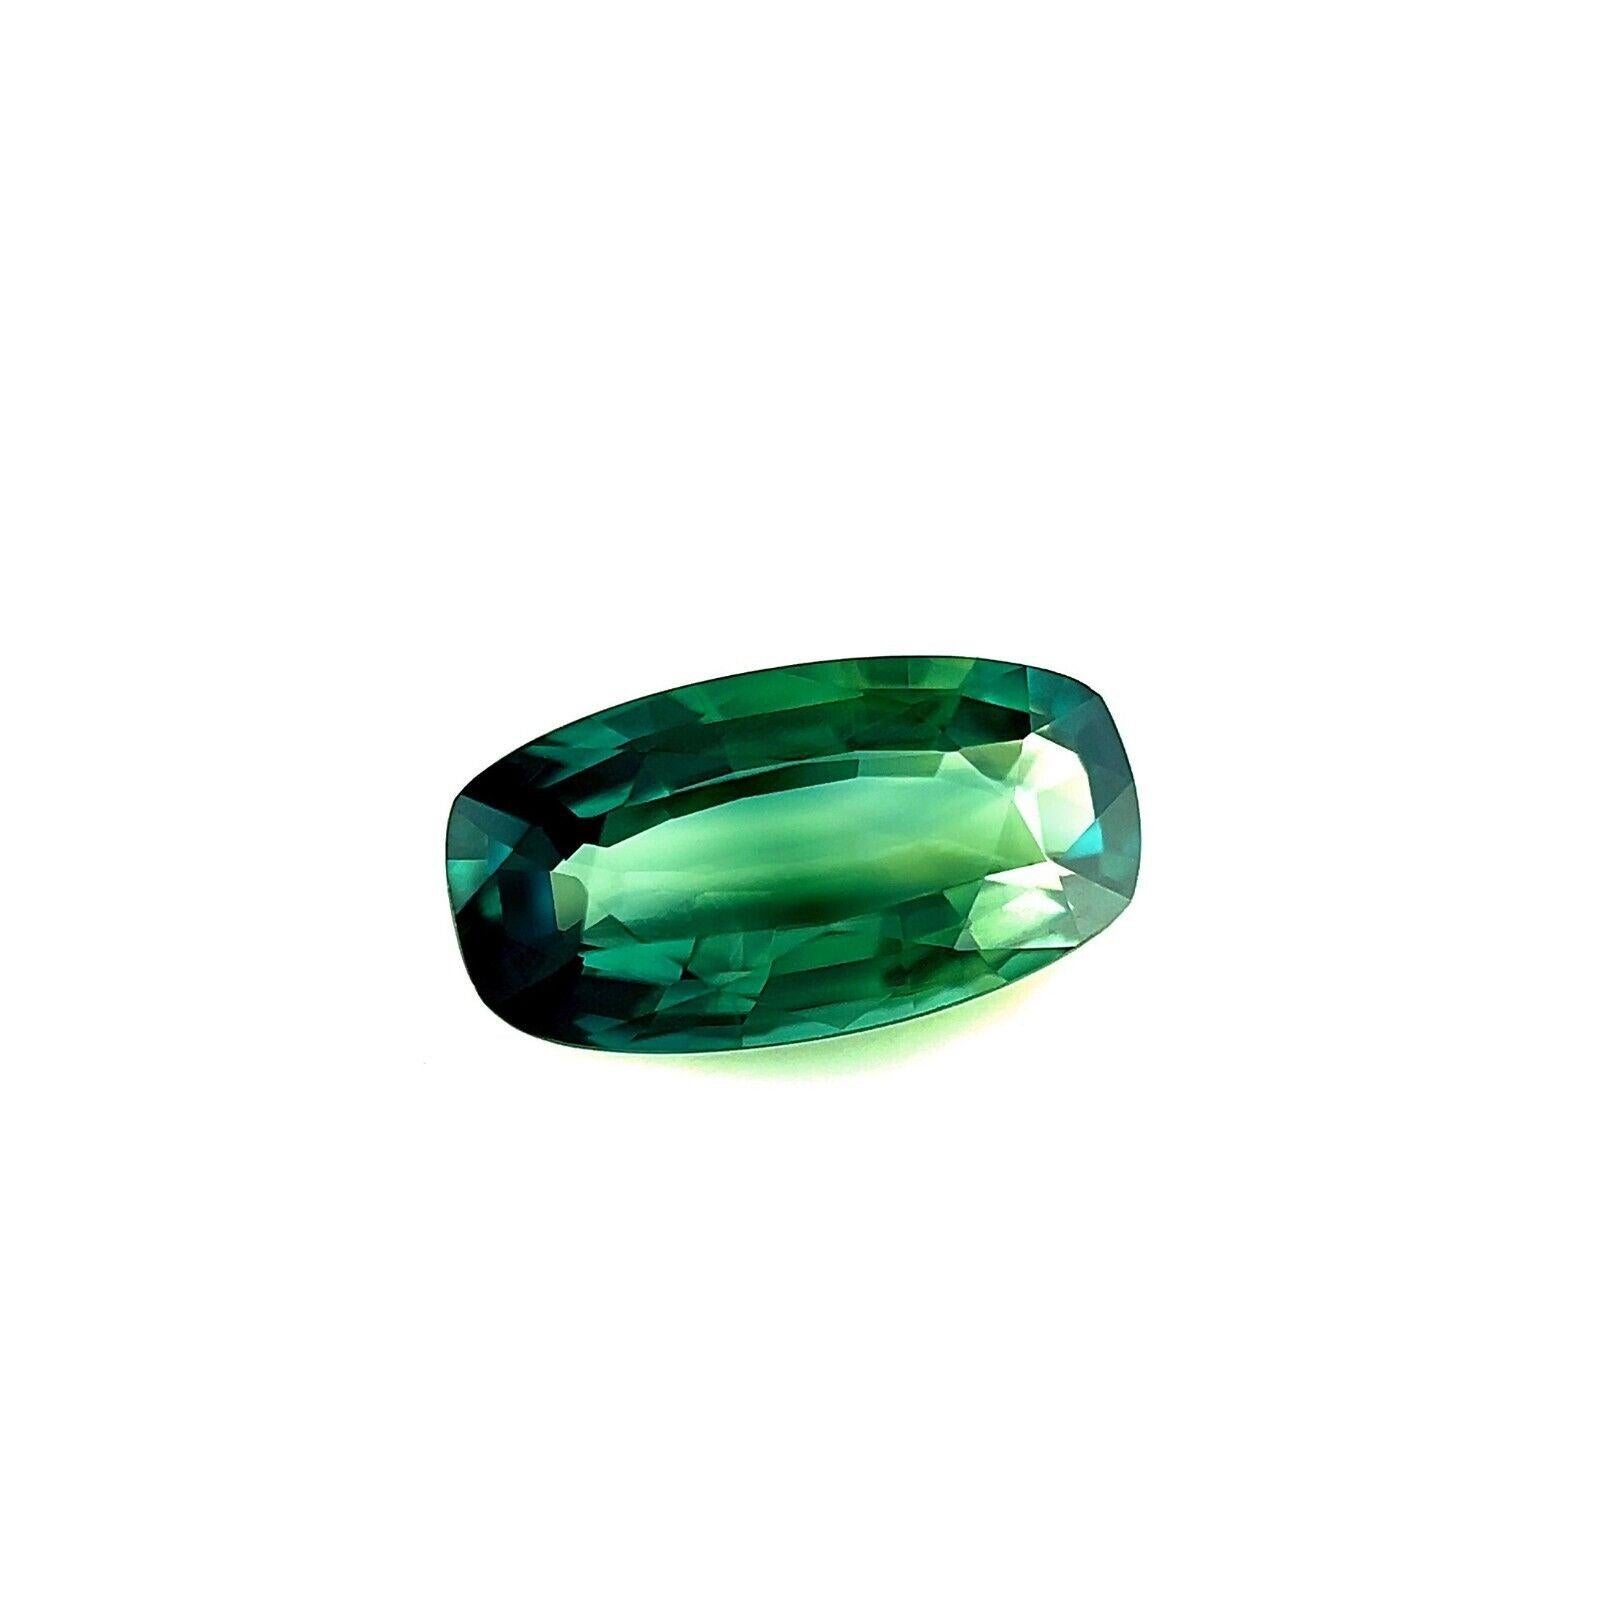 GIA Certified 1.46Ct Untreated 'Lagoon' Blue Green Sapphire Cushion Cut Gem

Natural GIA Certified Untreated Blue Green Sapphire Gemstone.
1.46 Carat unheated sapphire with a beautiful vivid blue green 'Lagoon' colour.
Fully certified by GIA